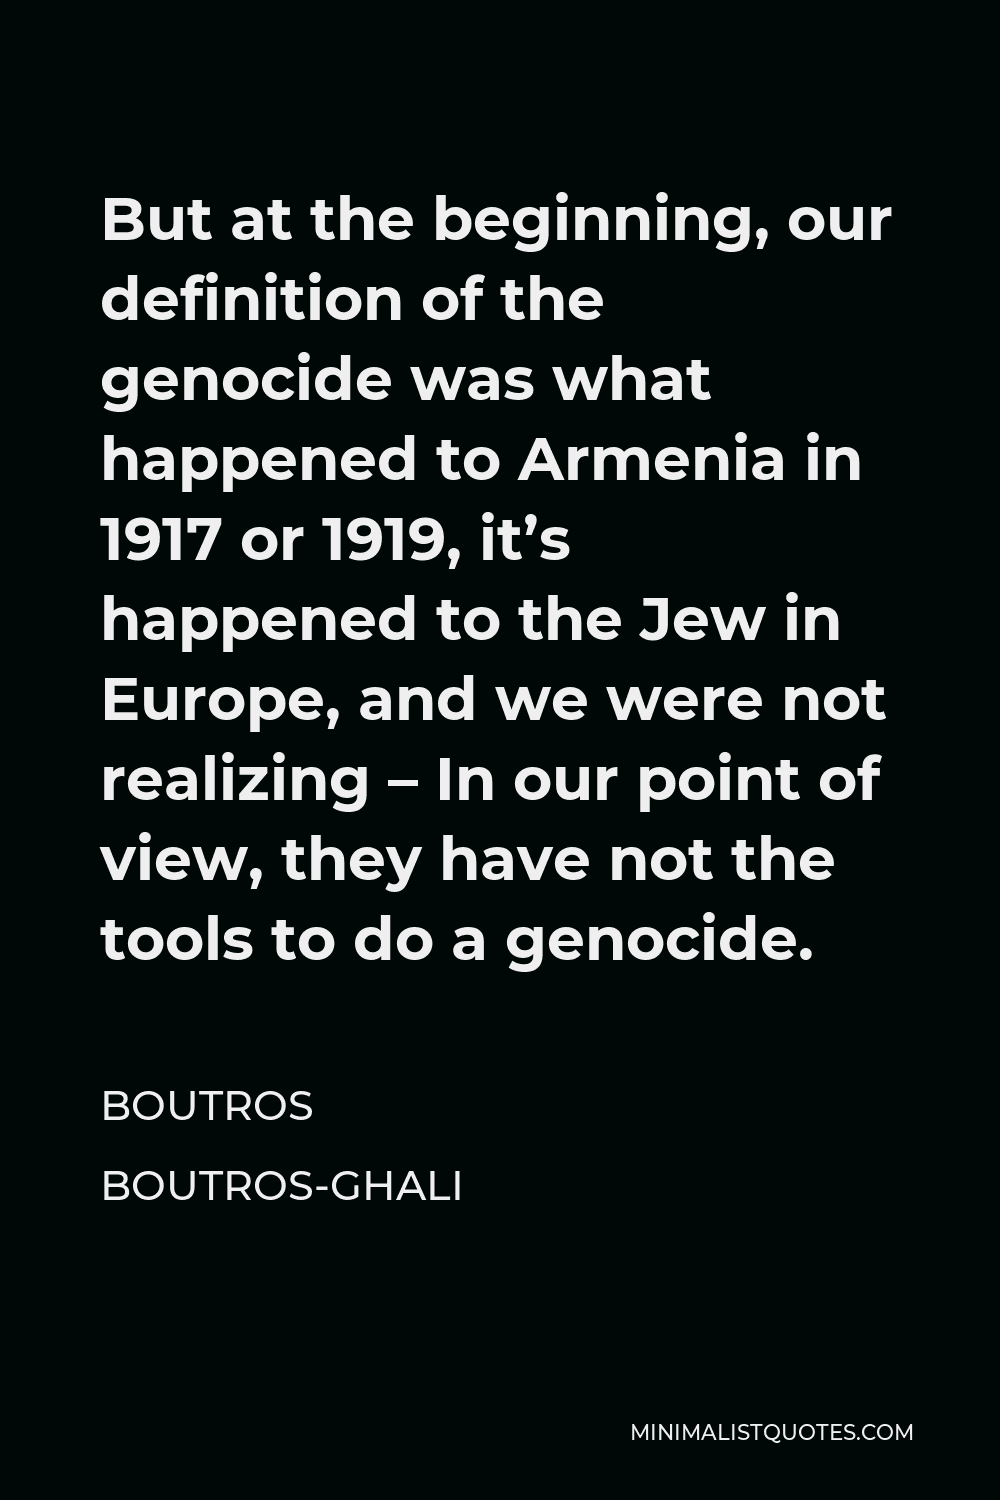 Boutros Boutros-Ghali Quote - But at the beginning, our definition of the genocide was what happened to Armenia in 1917 or 1919, it’s happened to the Jew in Europe, and we were not realizing – In our point of view, they have not the tools to do a genocide.